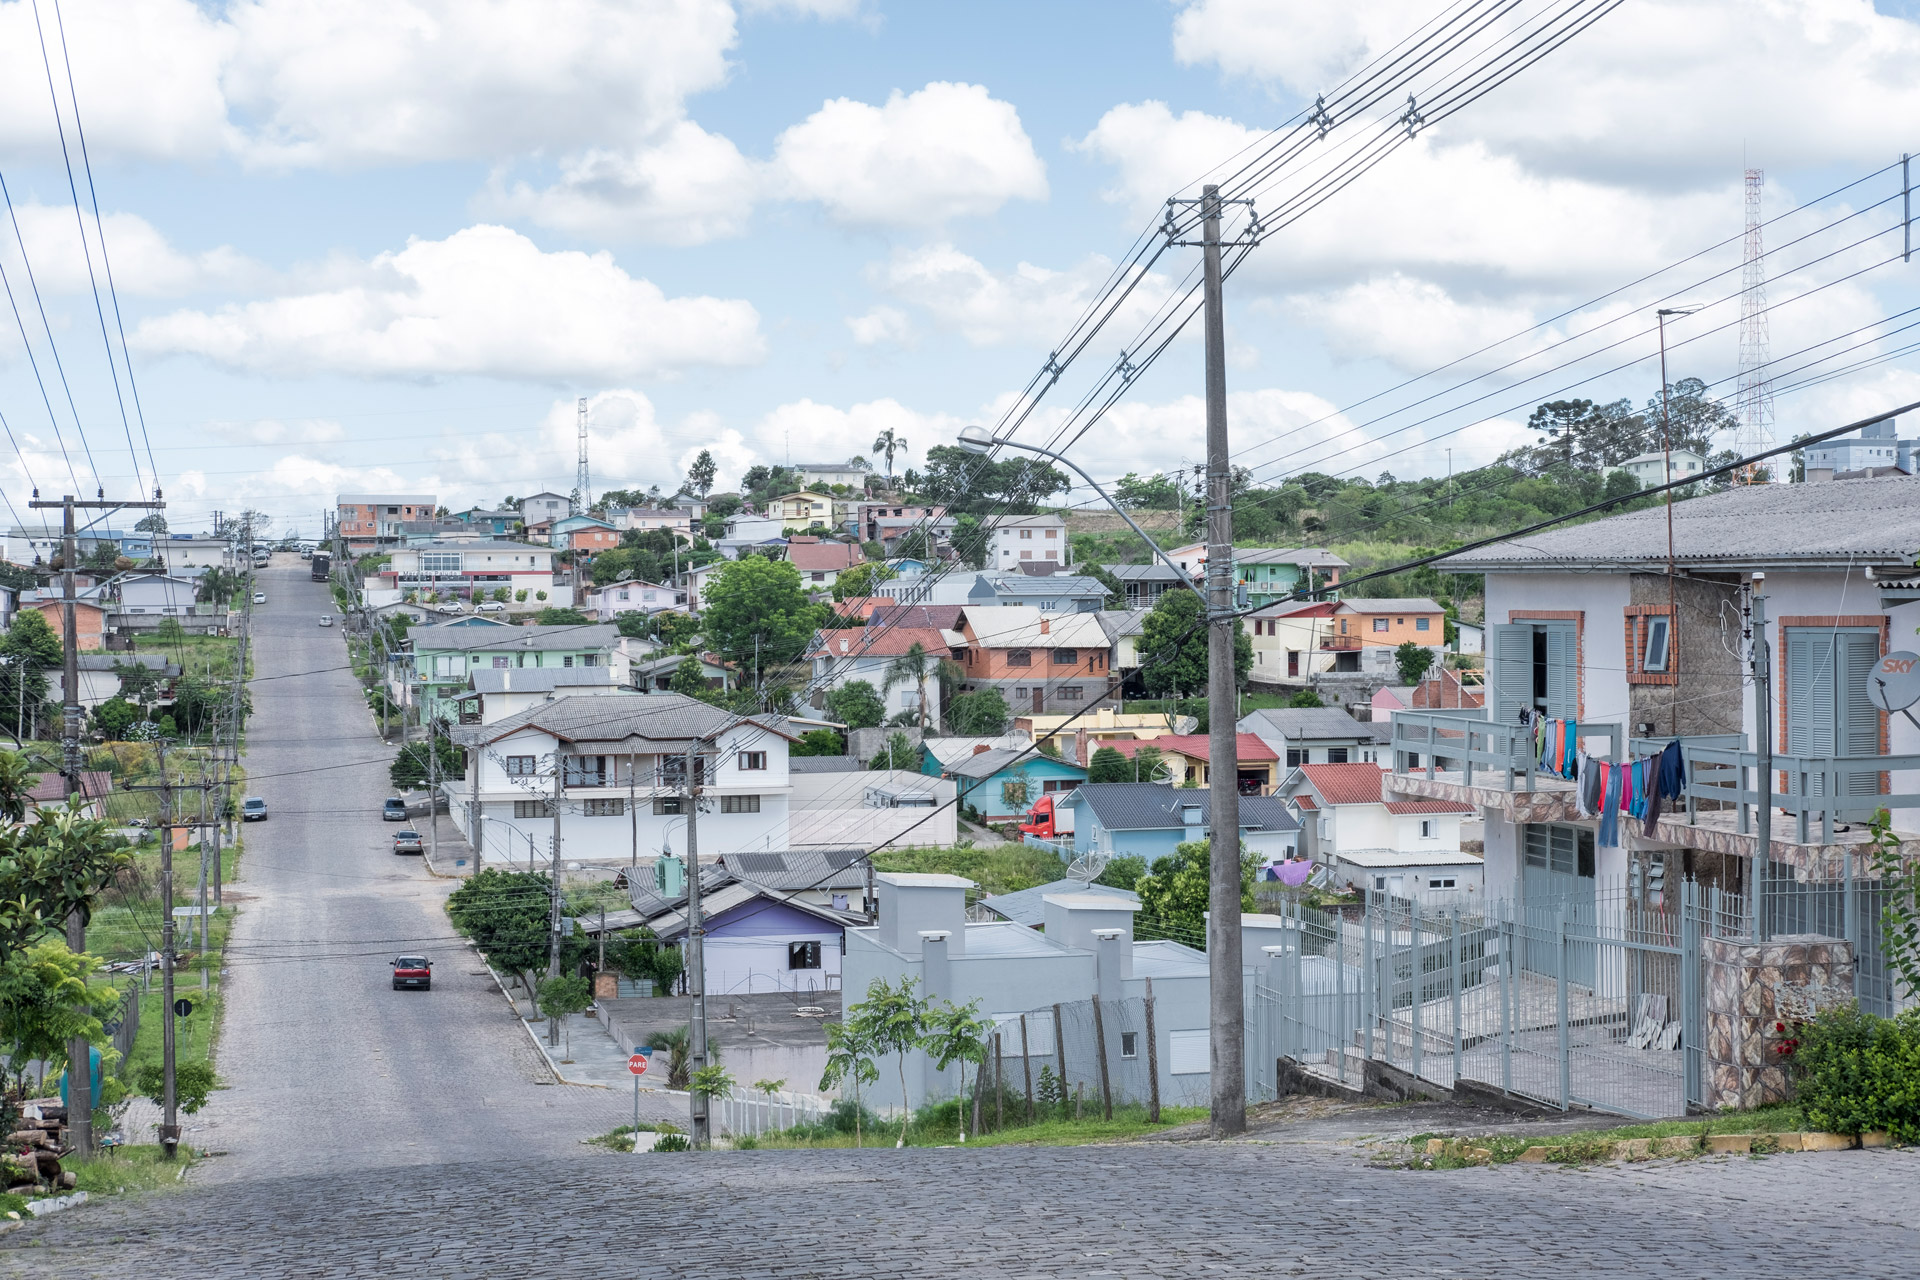 There are not any ophthalmologists in the countryside of Southern Brazil where Claudete José Custódio lives.